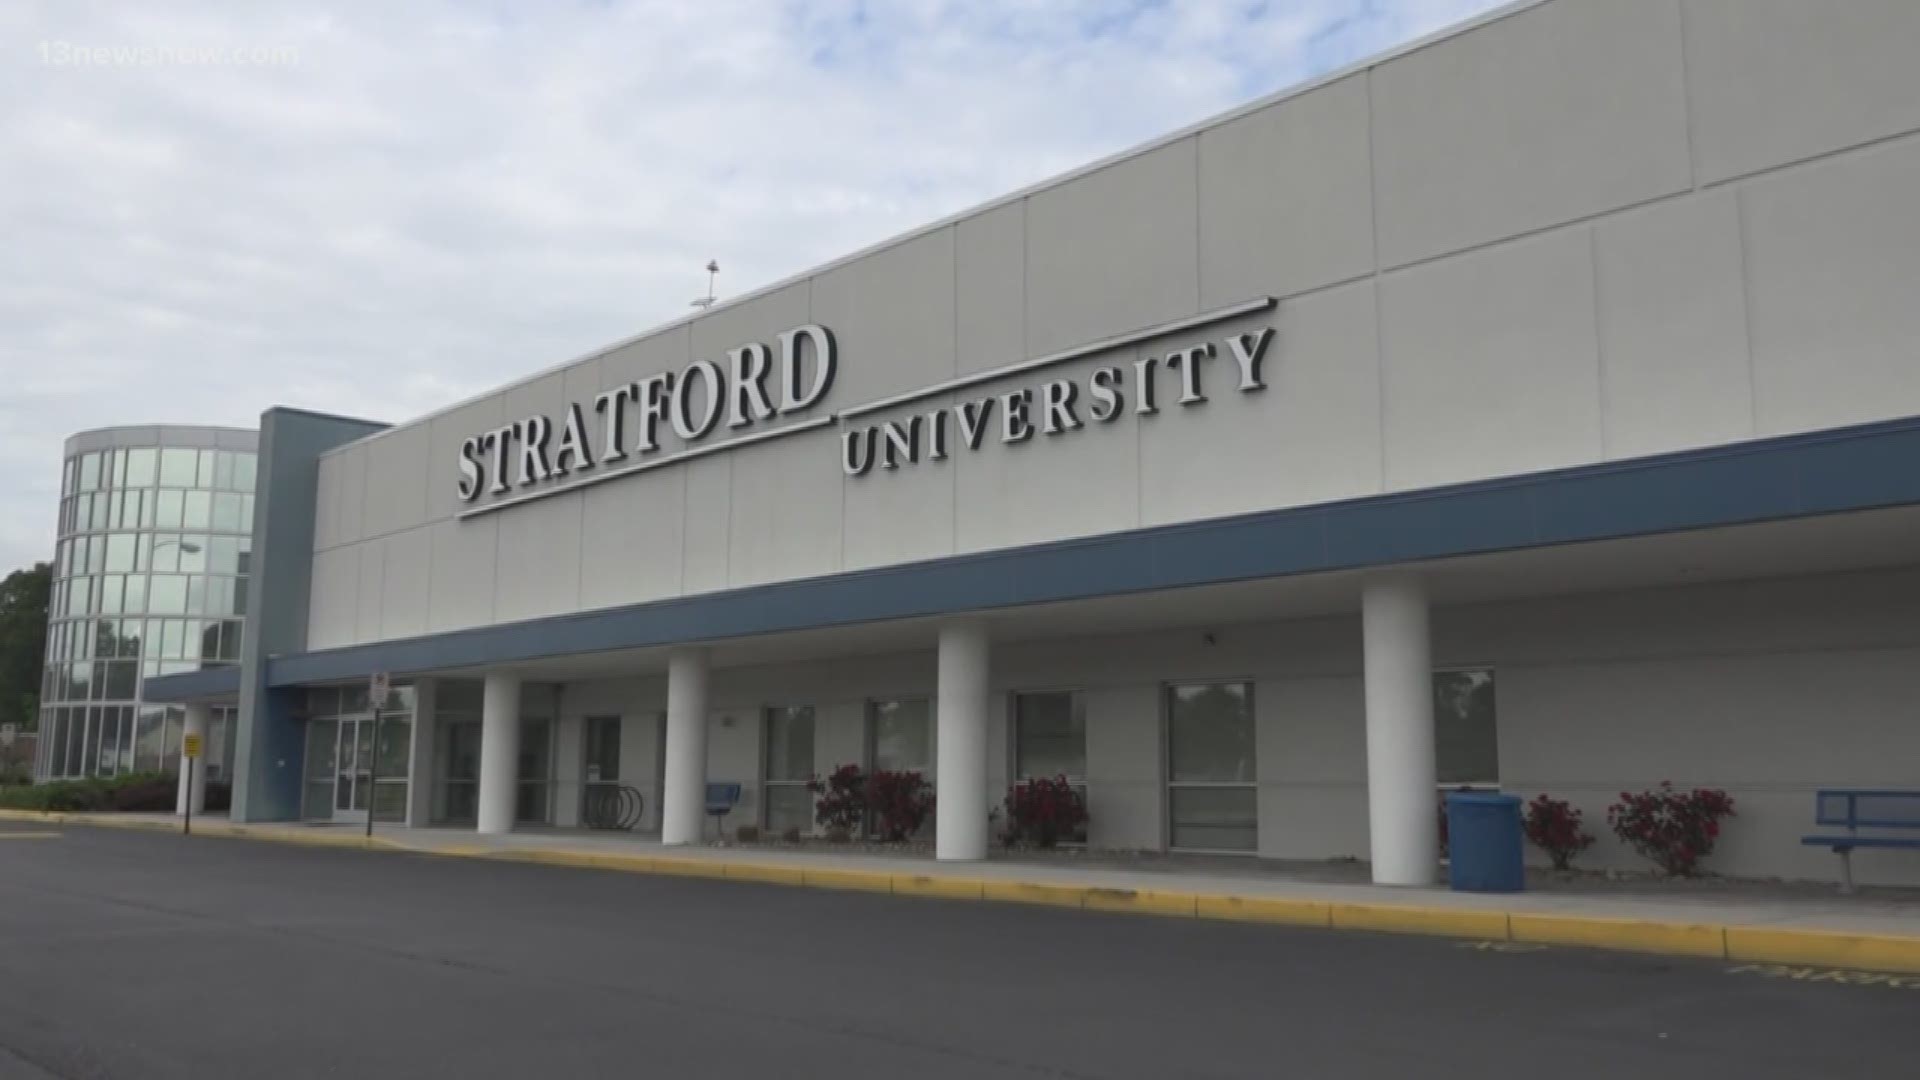 The Newport News and Virginia Beach campuses are closing and the school is focused is helping students transition, but some students are concerned.